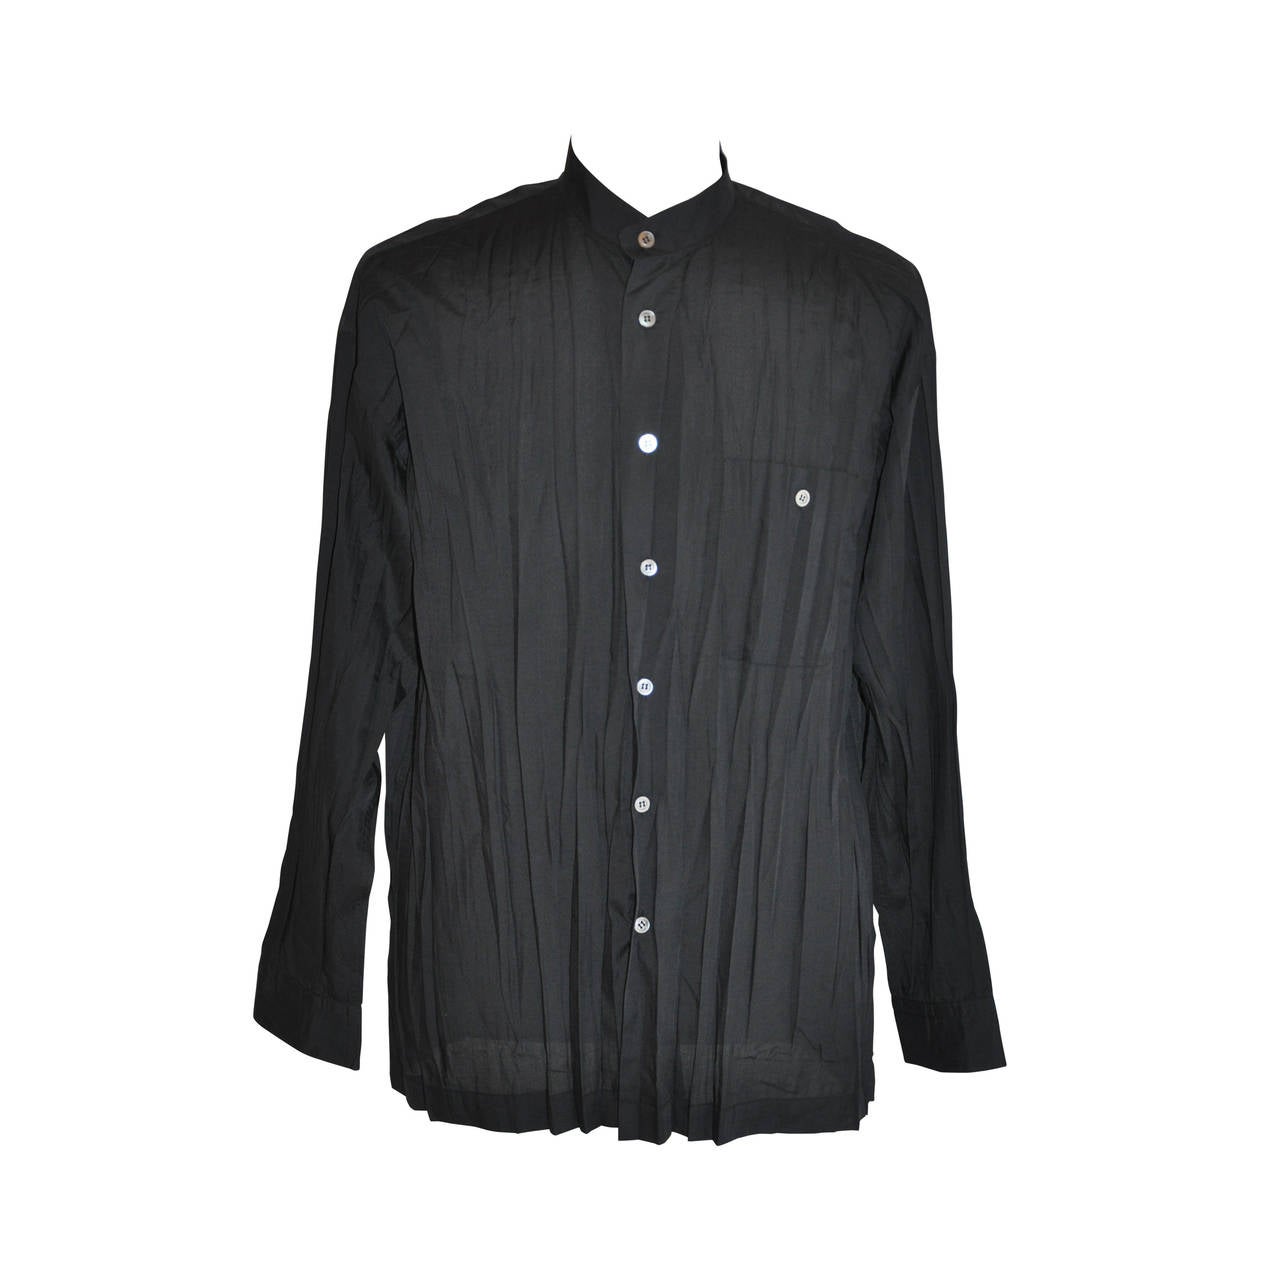 Issey Miyake Men's Black Accordian Shirt with Mother-of-Pearl Accent For Sale